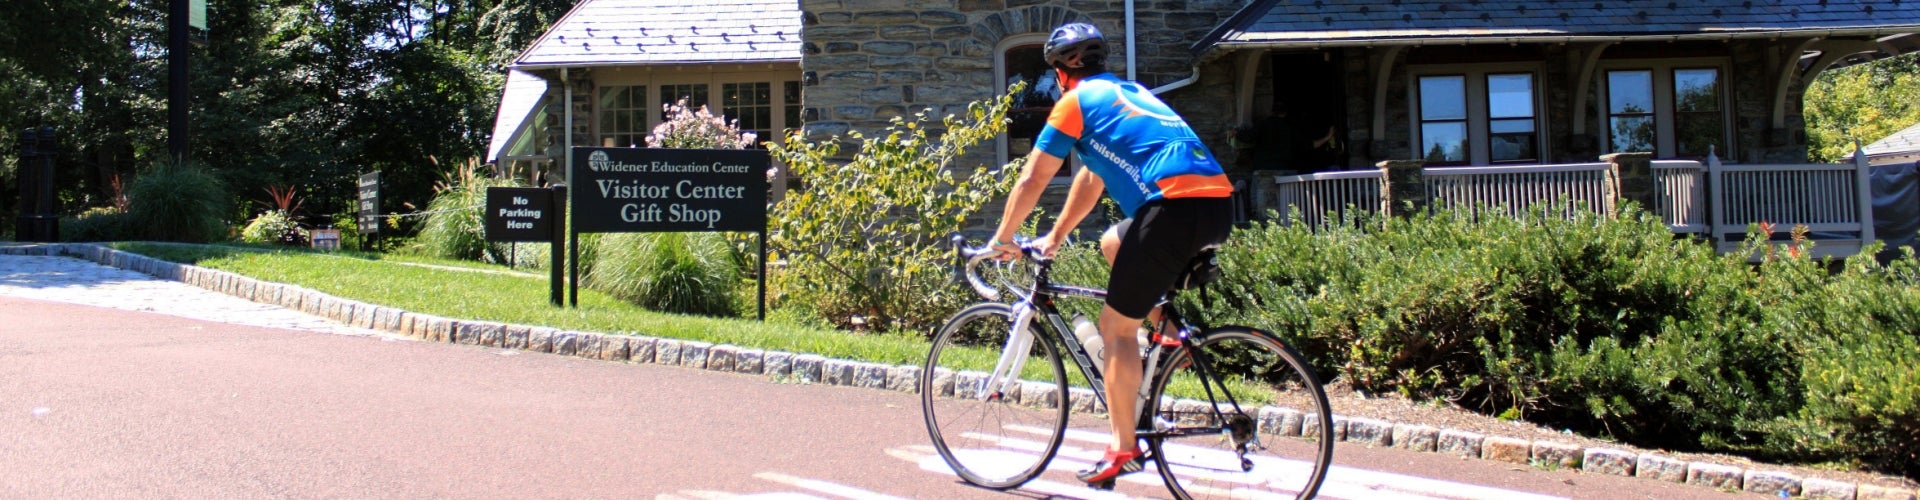 A cyclist rides along a paved path toward a sign that reads, "Visitor Center."